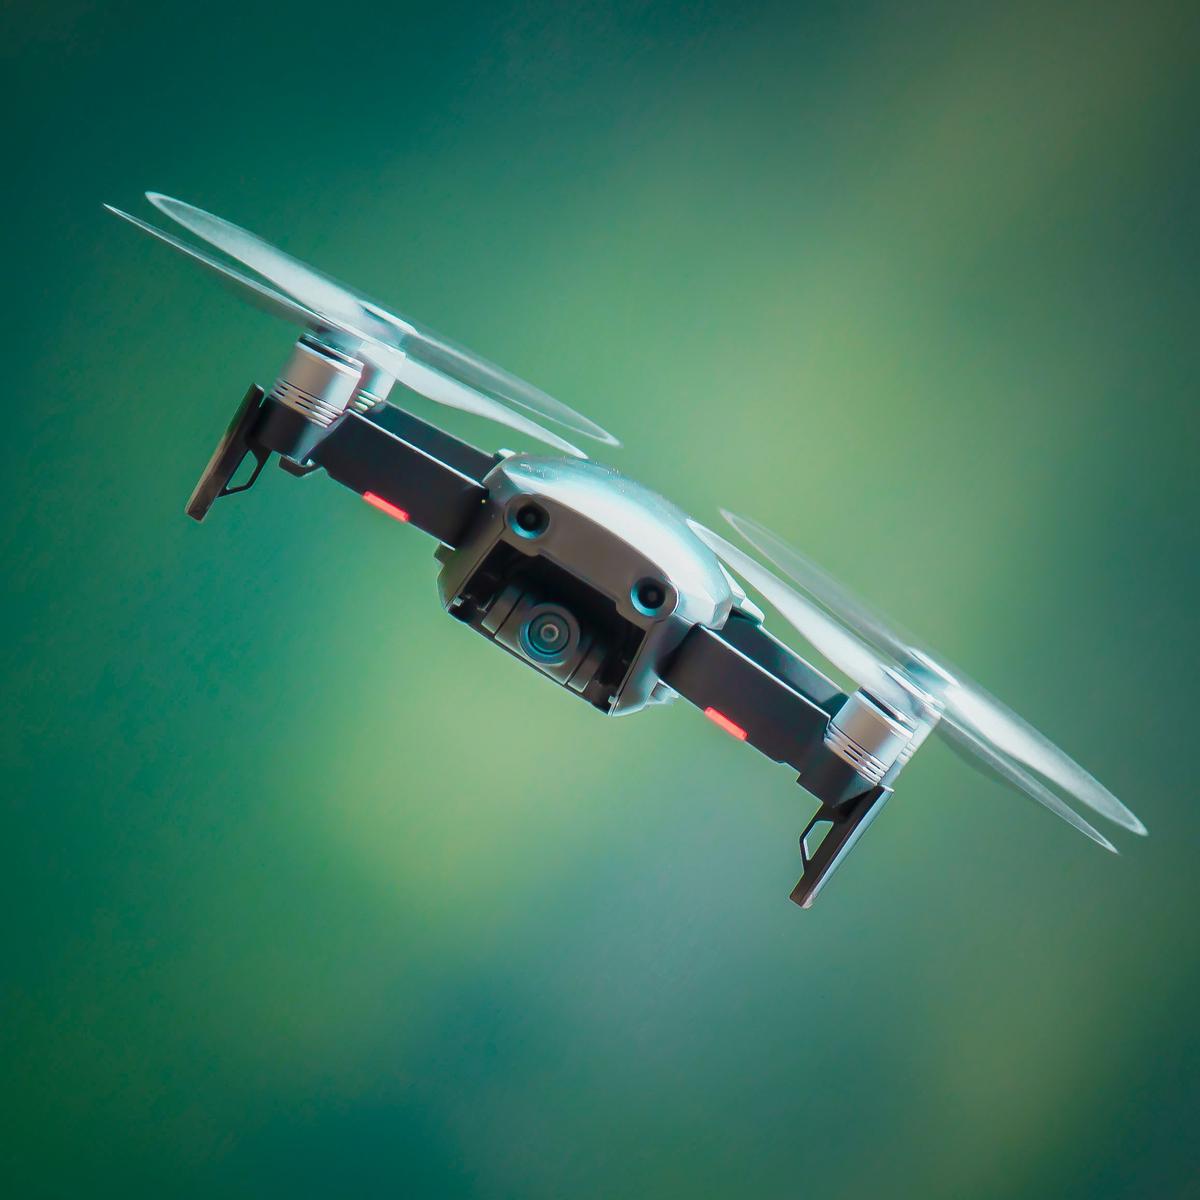 A picture of a drone with a shield around it to signify protection and safety from potential risks and liabilities that come with operating a drone.